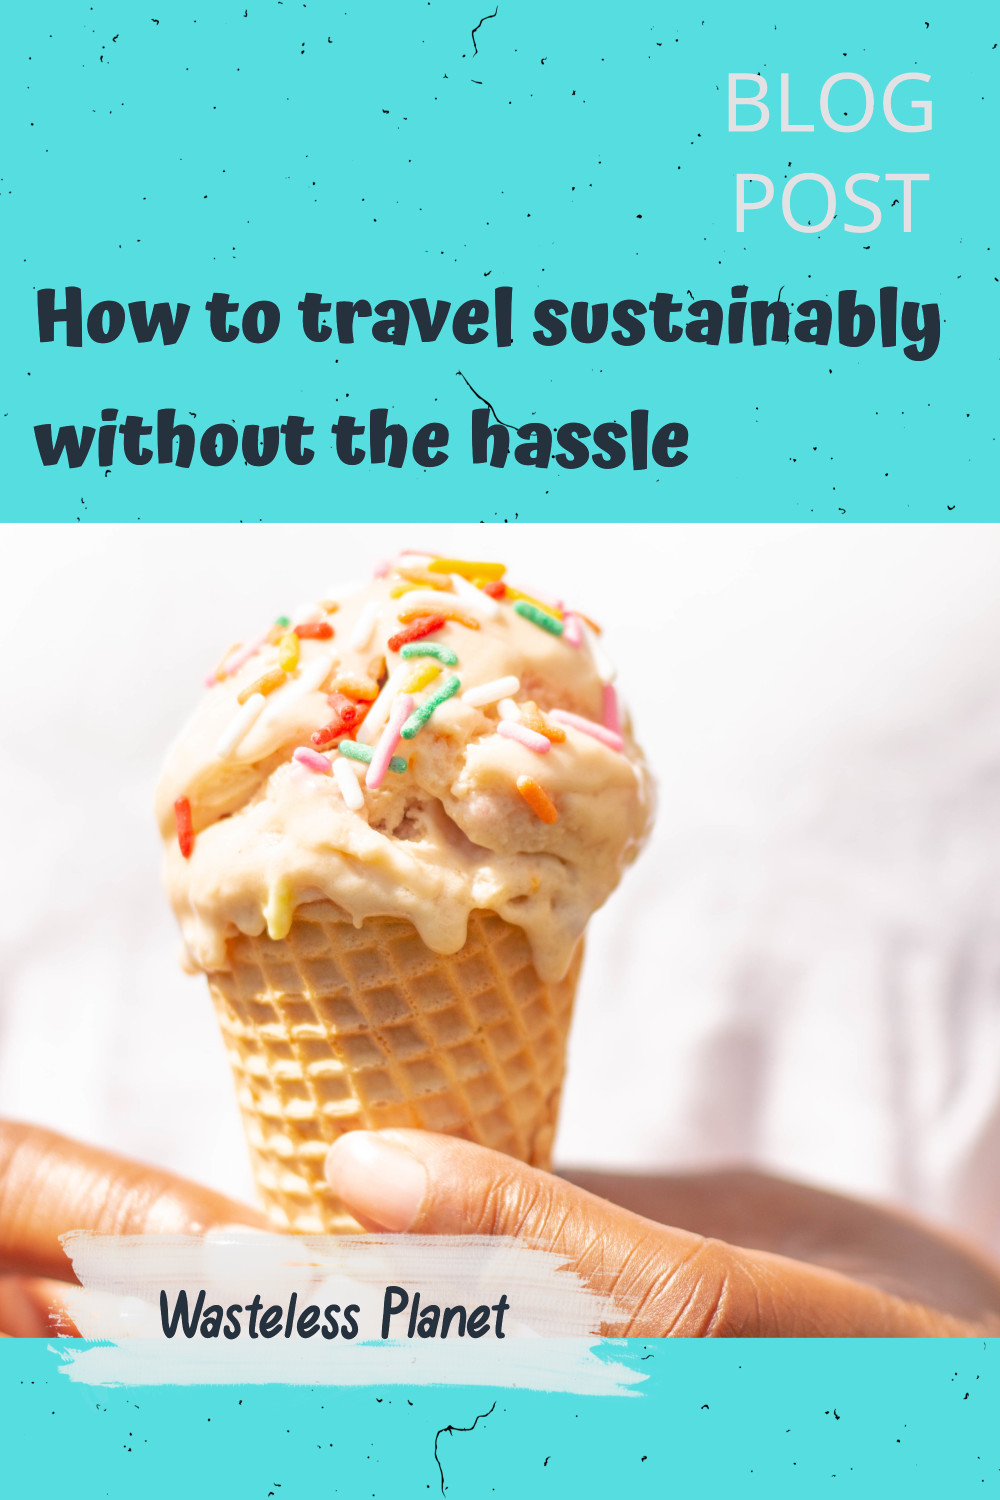 How to travel sustainably without the hassle